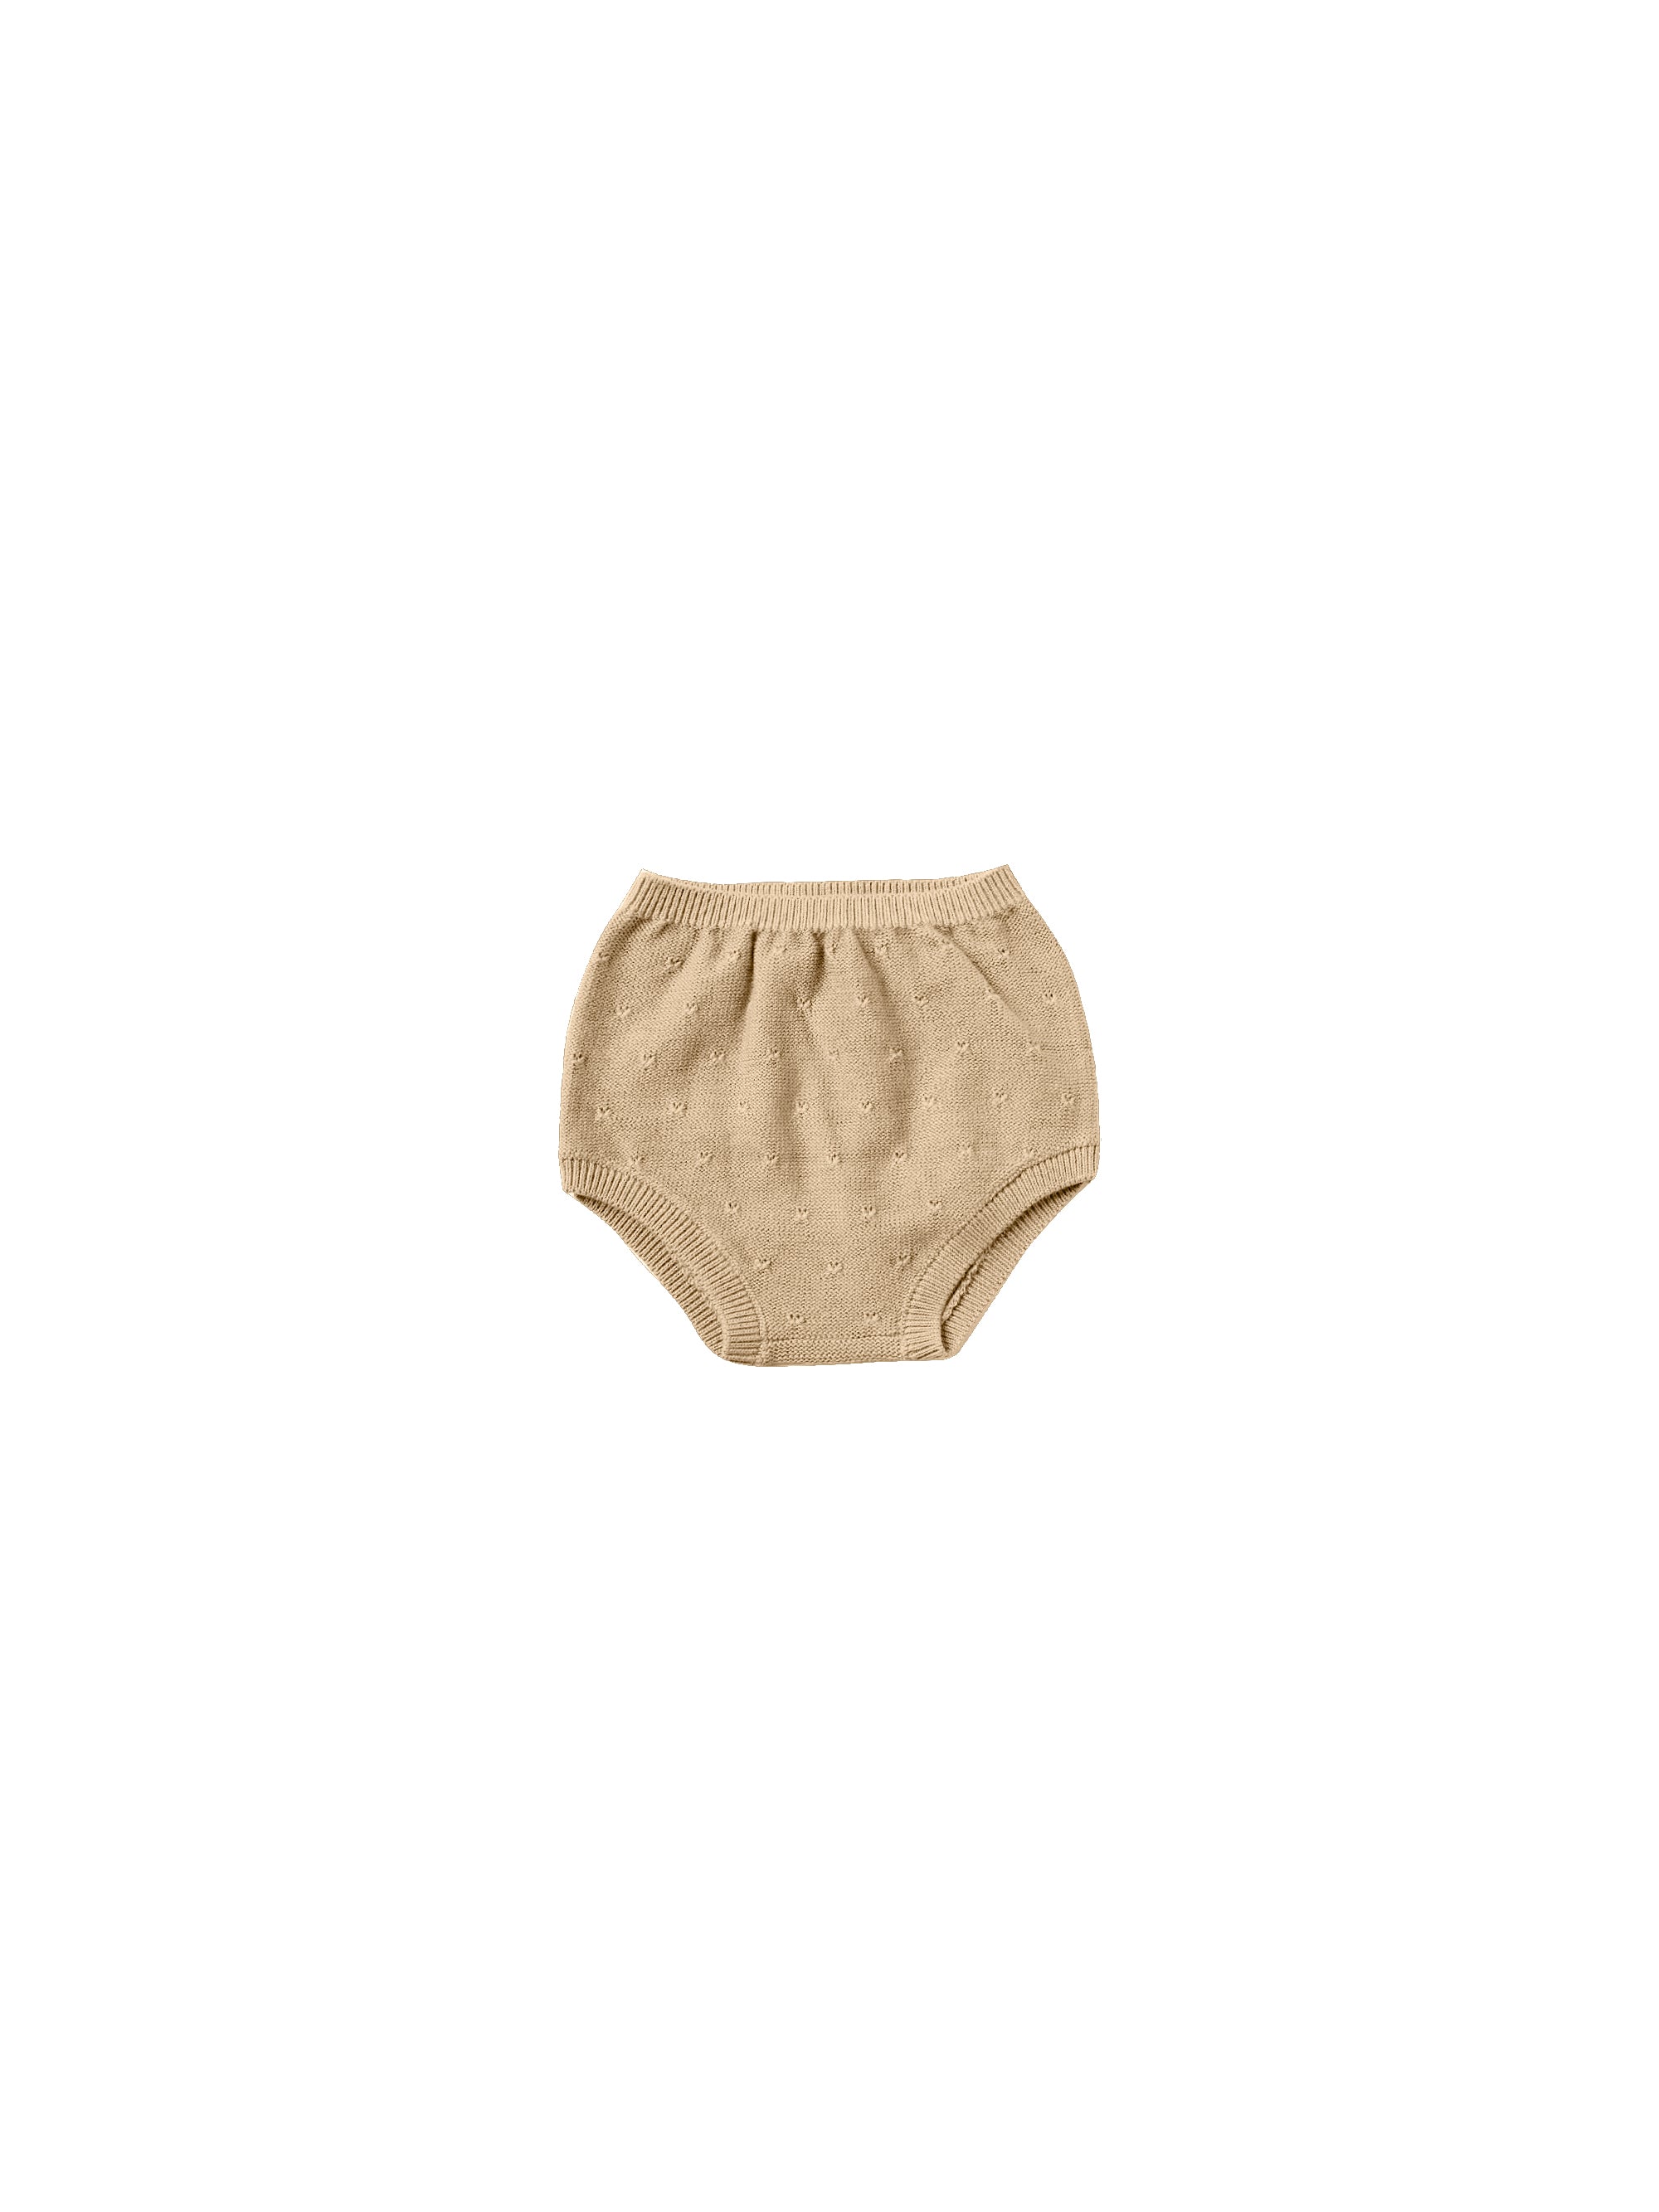 QUINCY MAE KNIT BLOOMER / HONEY